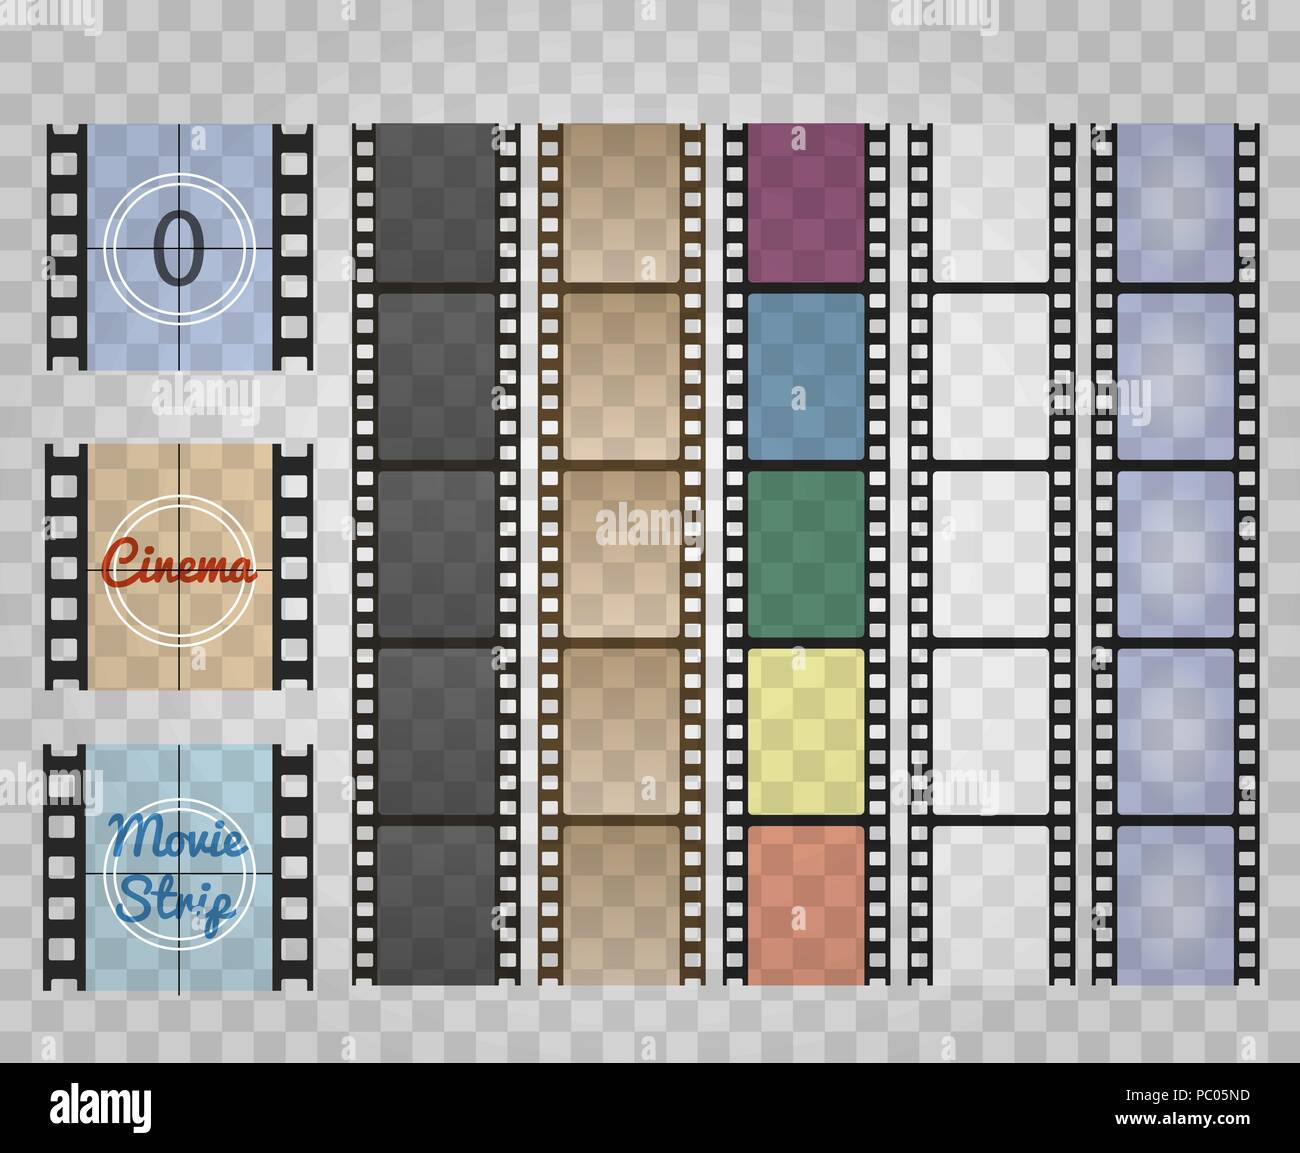 https://c8.alamy.com/comp/PC05ND/filmstrip-on-transparent-movie-film-strip-isolated-vector-cinema-old-reel-camera-strips-super-8-retro-35mm-celluloid-frames-PC05ND.jpg